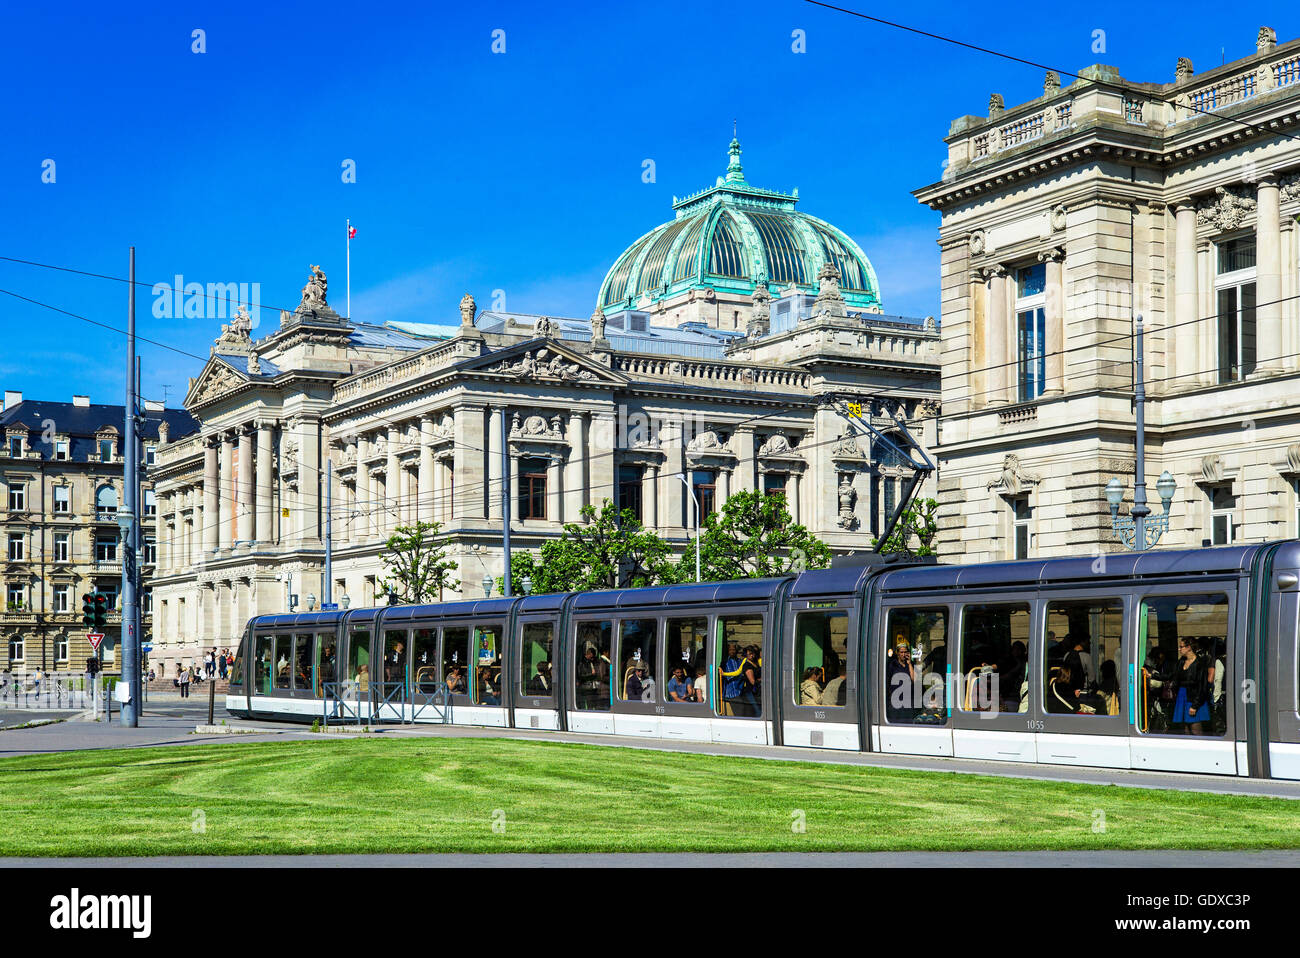 BNU, National University Library and tram, Strasbourg, Alsace, France, Europe Stock Photo